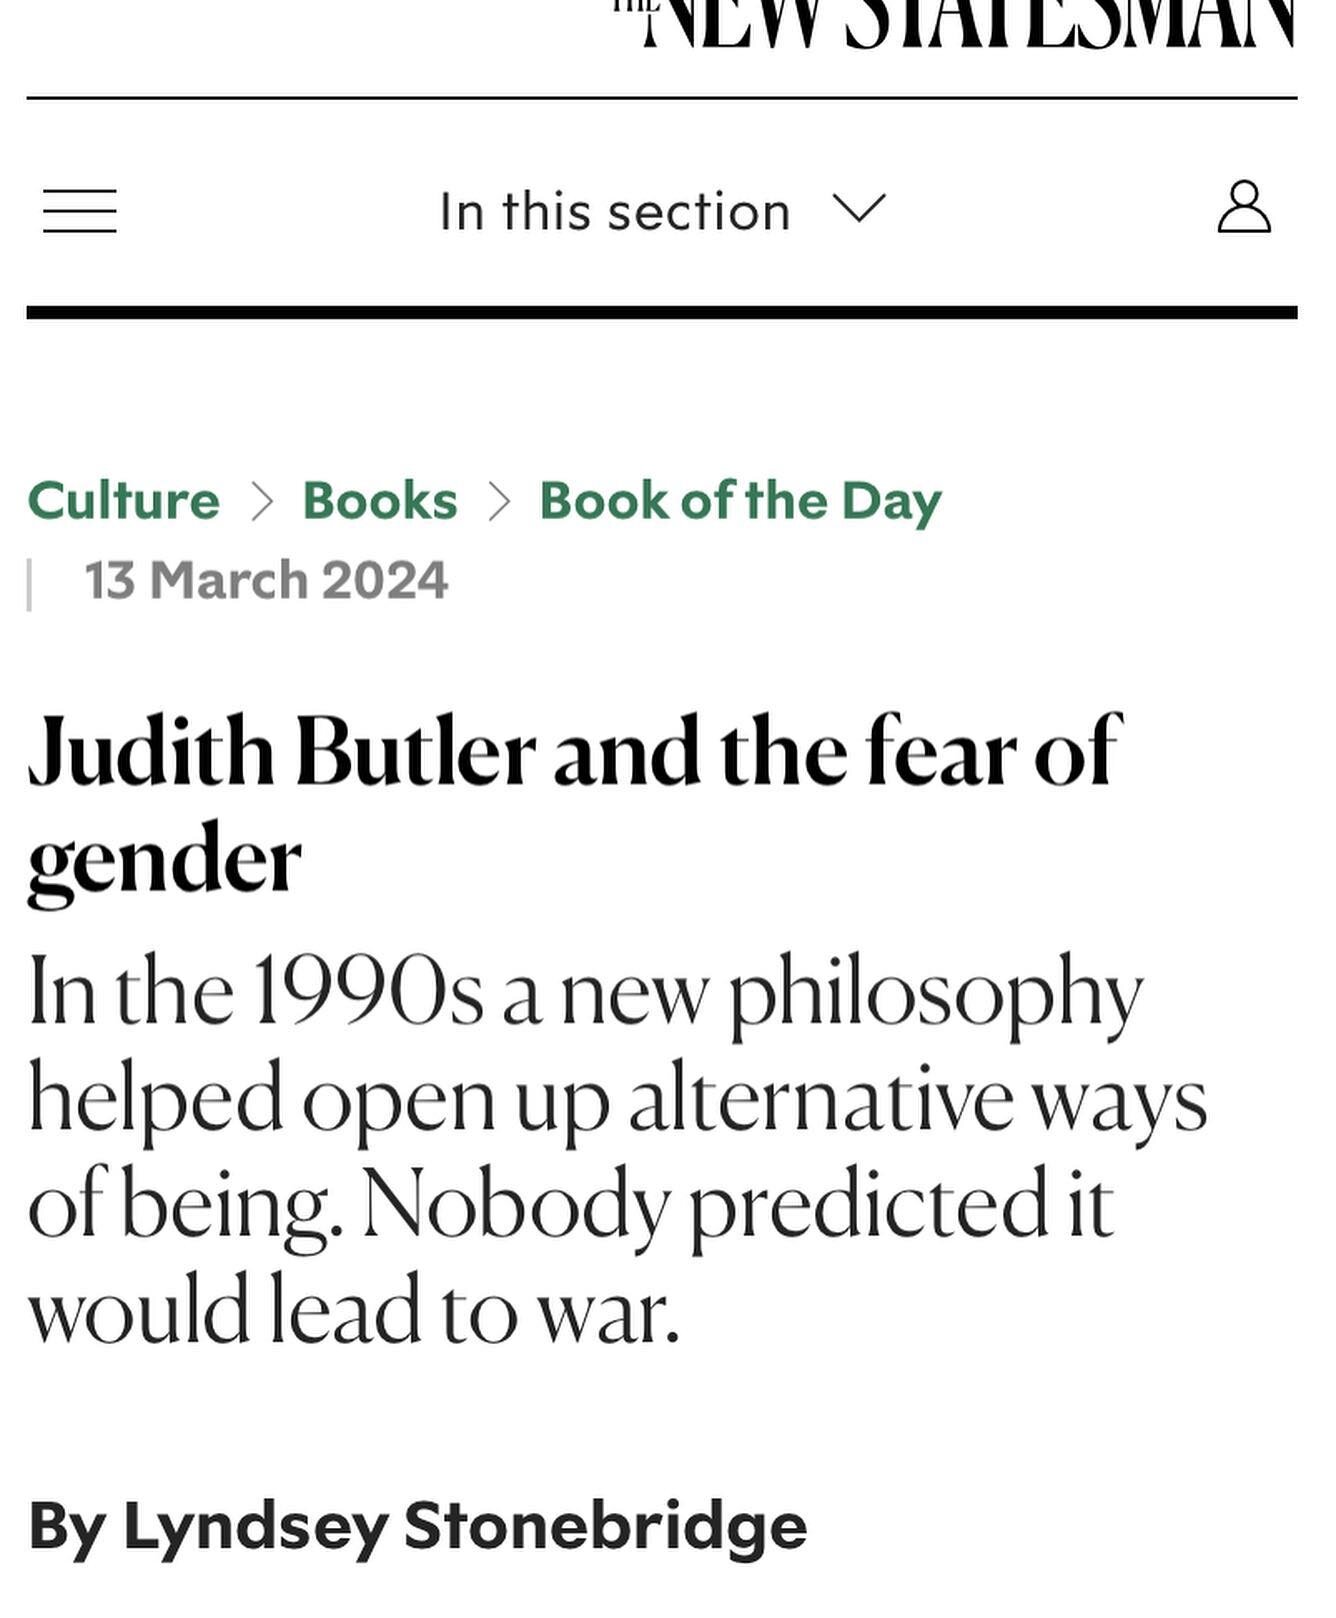 I wrote a review of Judith Butler&rsquo;s new book for the New Statesman. The book took me back over the last 40 years of love, loss, possibility &amp; rage. The sadness &amp; the promise - always the promise.